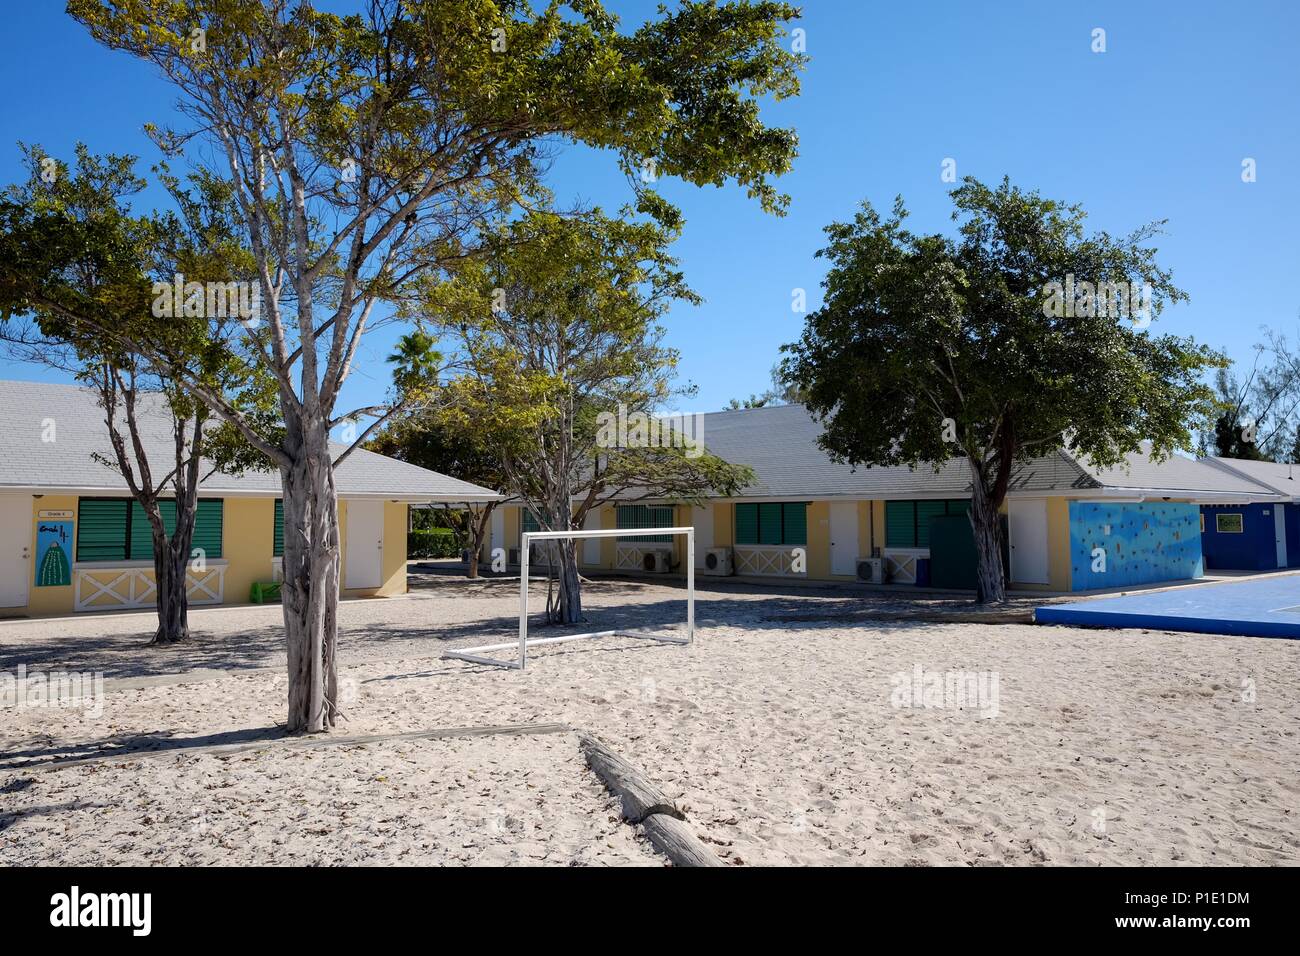 Football (soccer) goalposts among sand, buildings and trees on a bright and sunny day Stock Photo